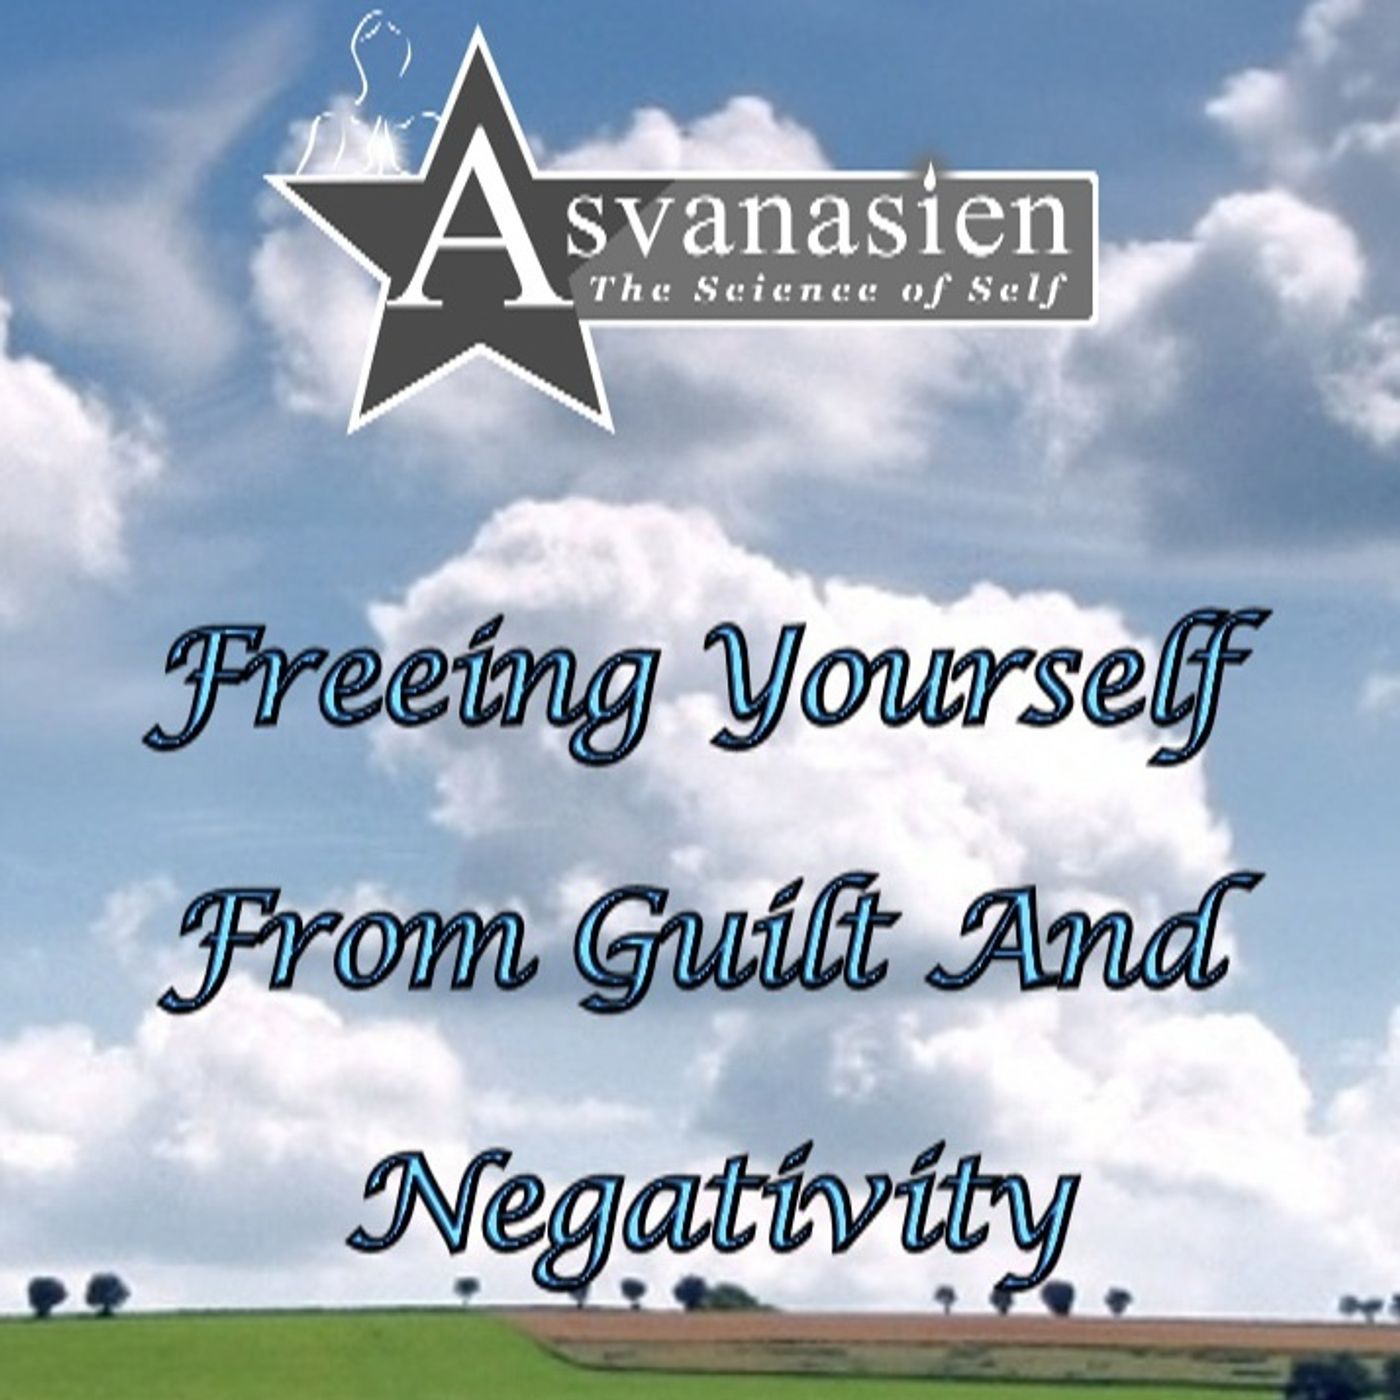 Freeing yourself from guilt & negativity